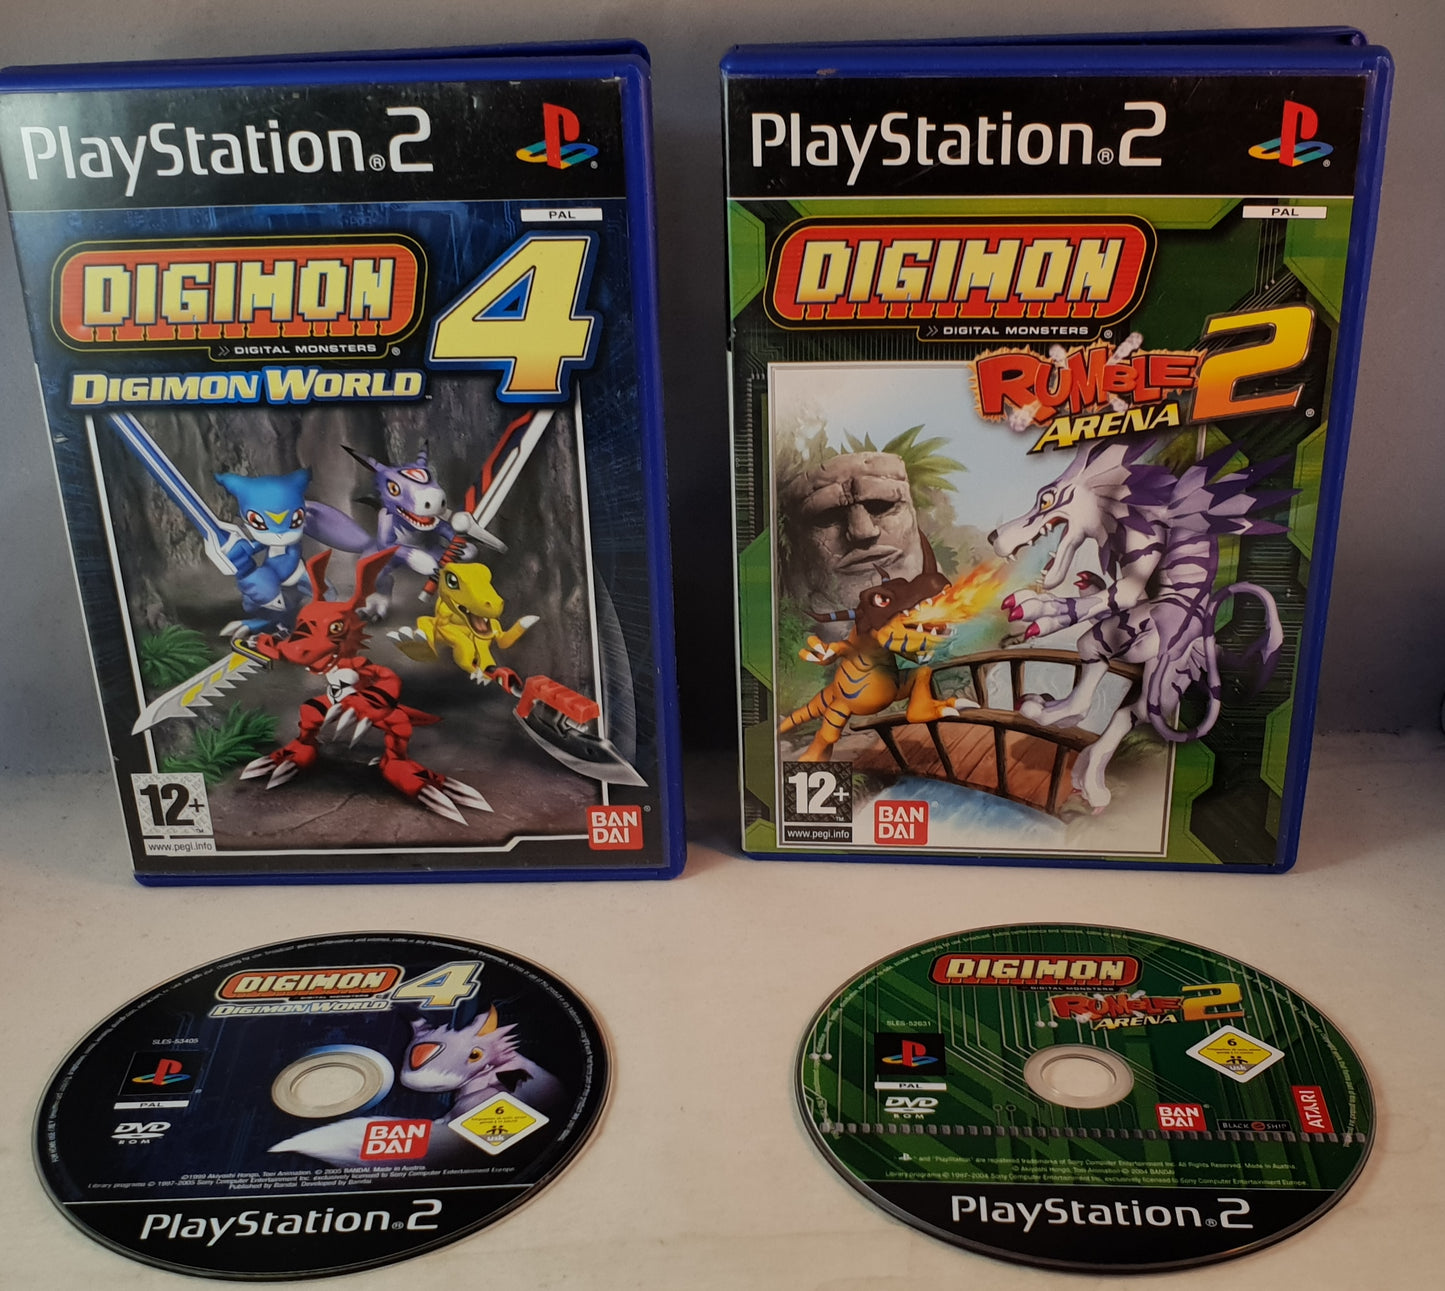 Digimon World 4 & Digimon Rumble Arena 2 Sony Playstation 2 (PS2) Game Bundle